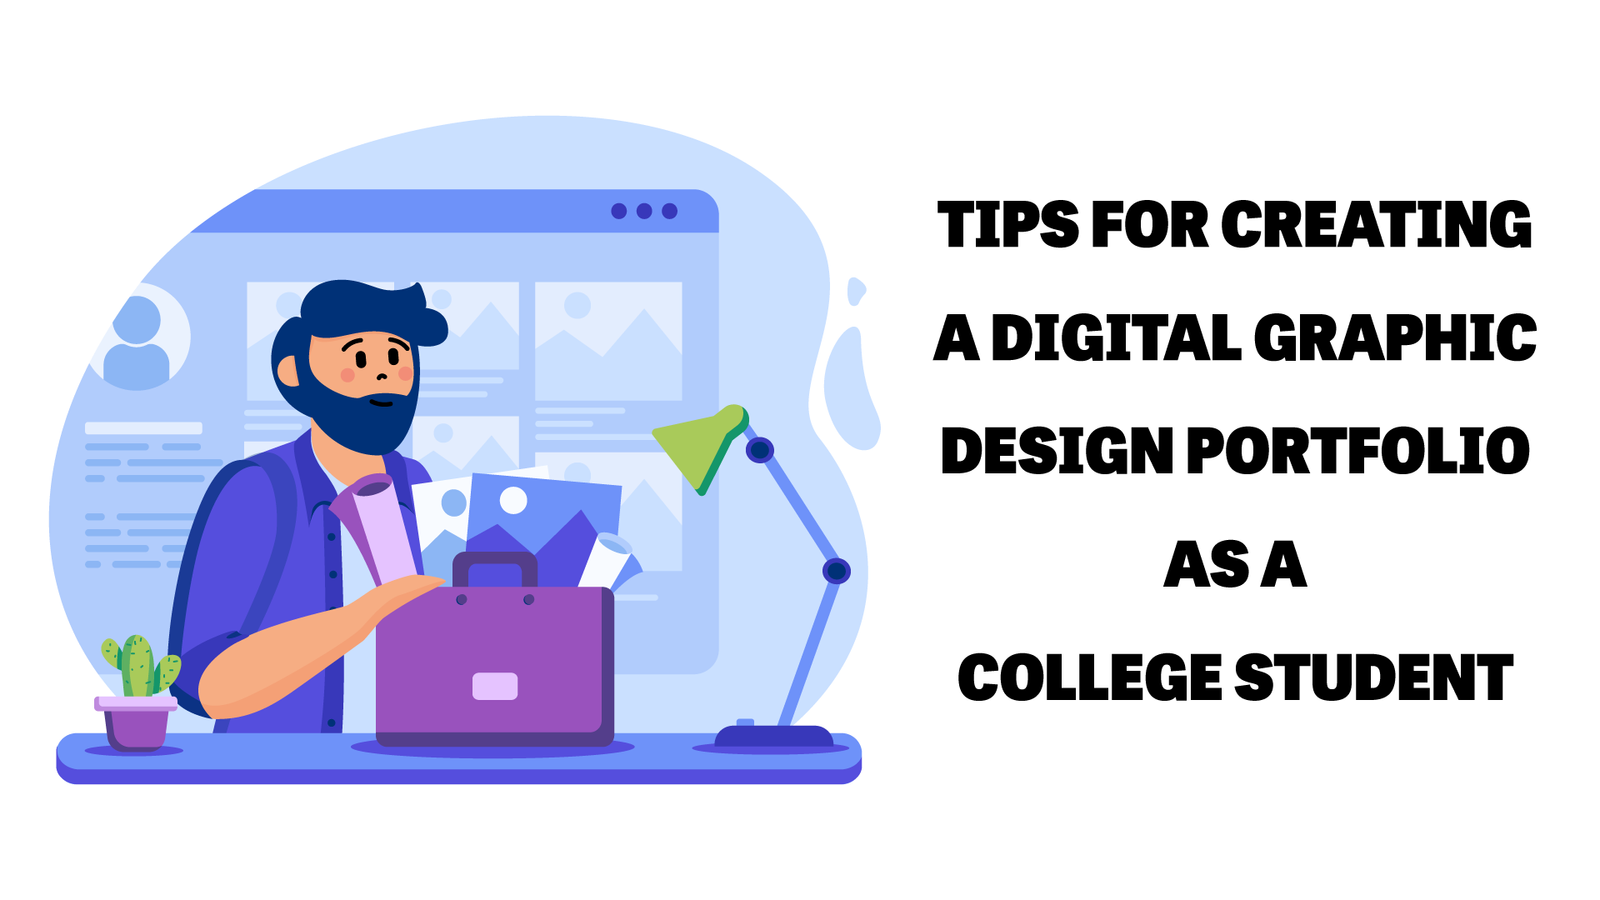 Tips for Creating a Digital Graphic Design Portfolio as a College Student